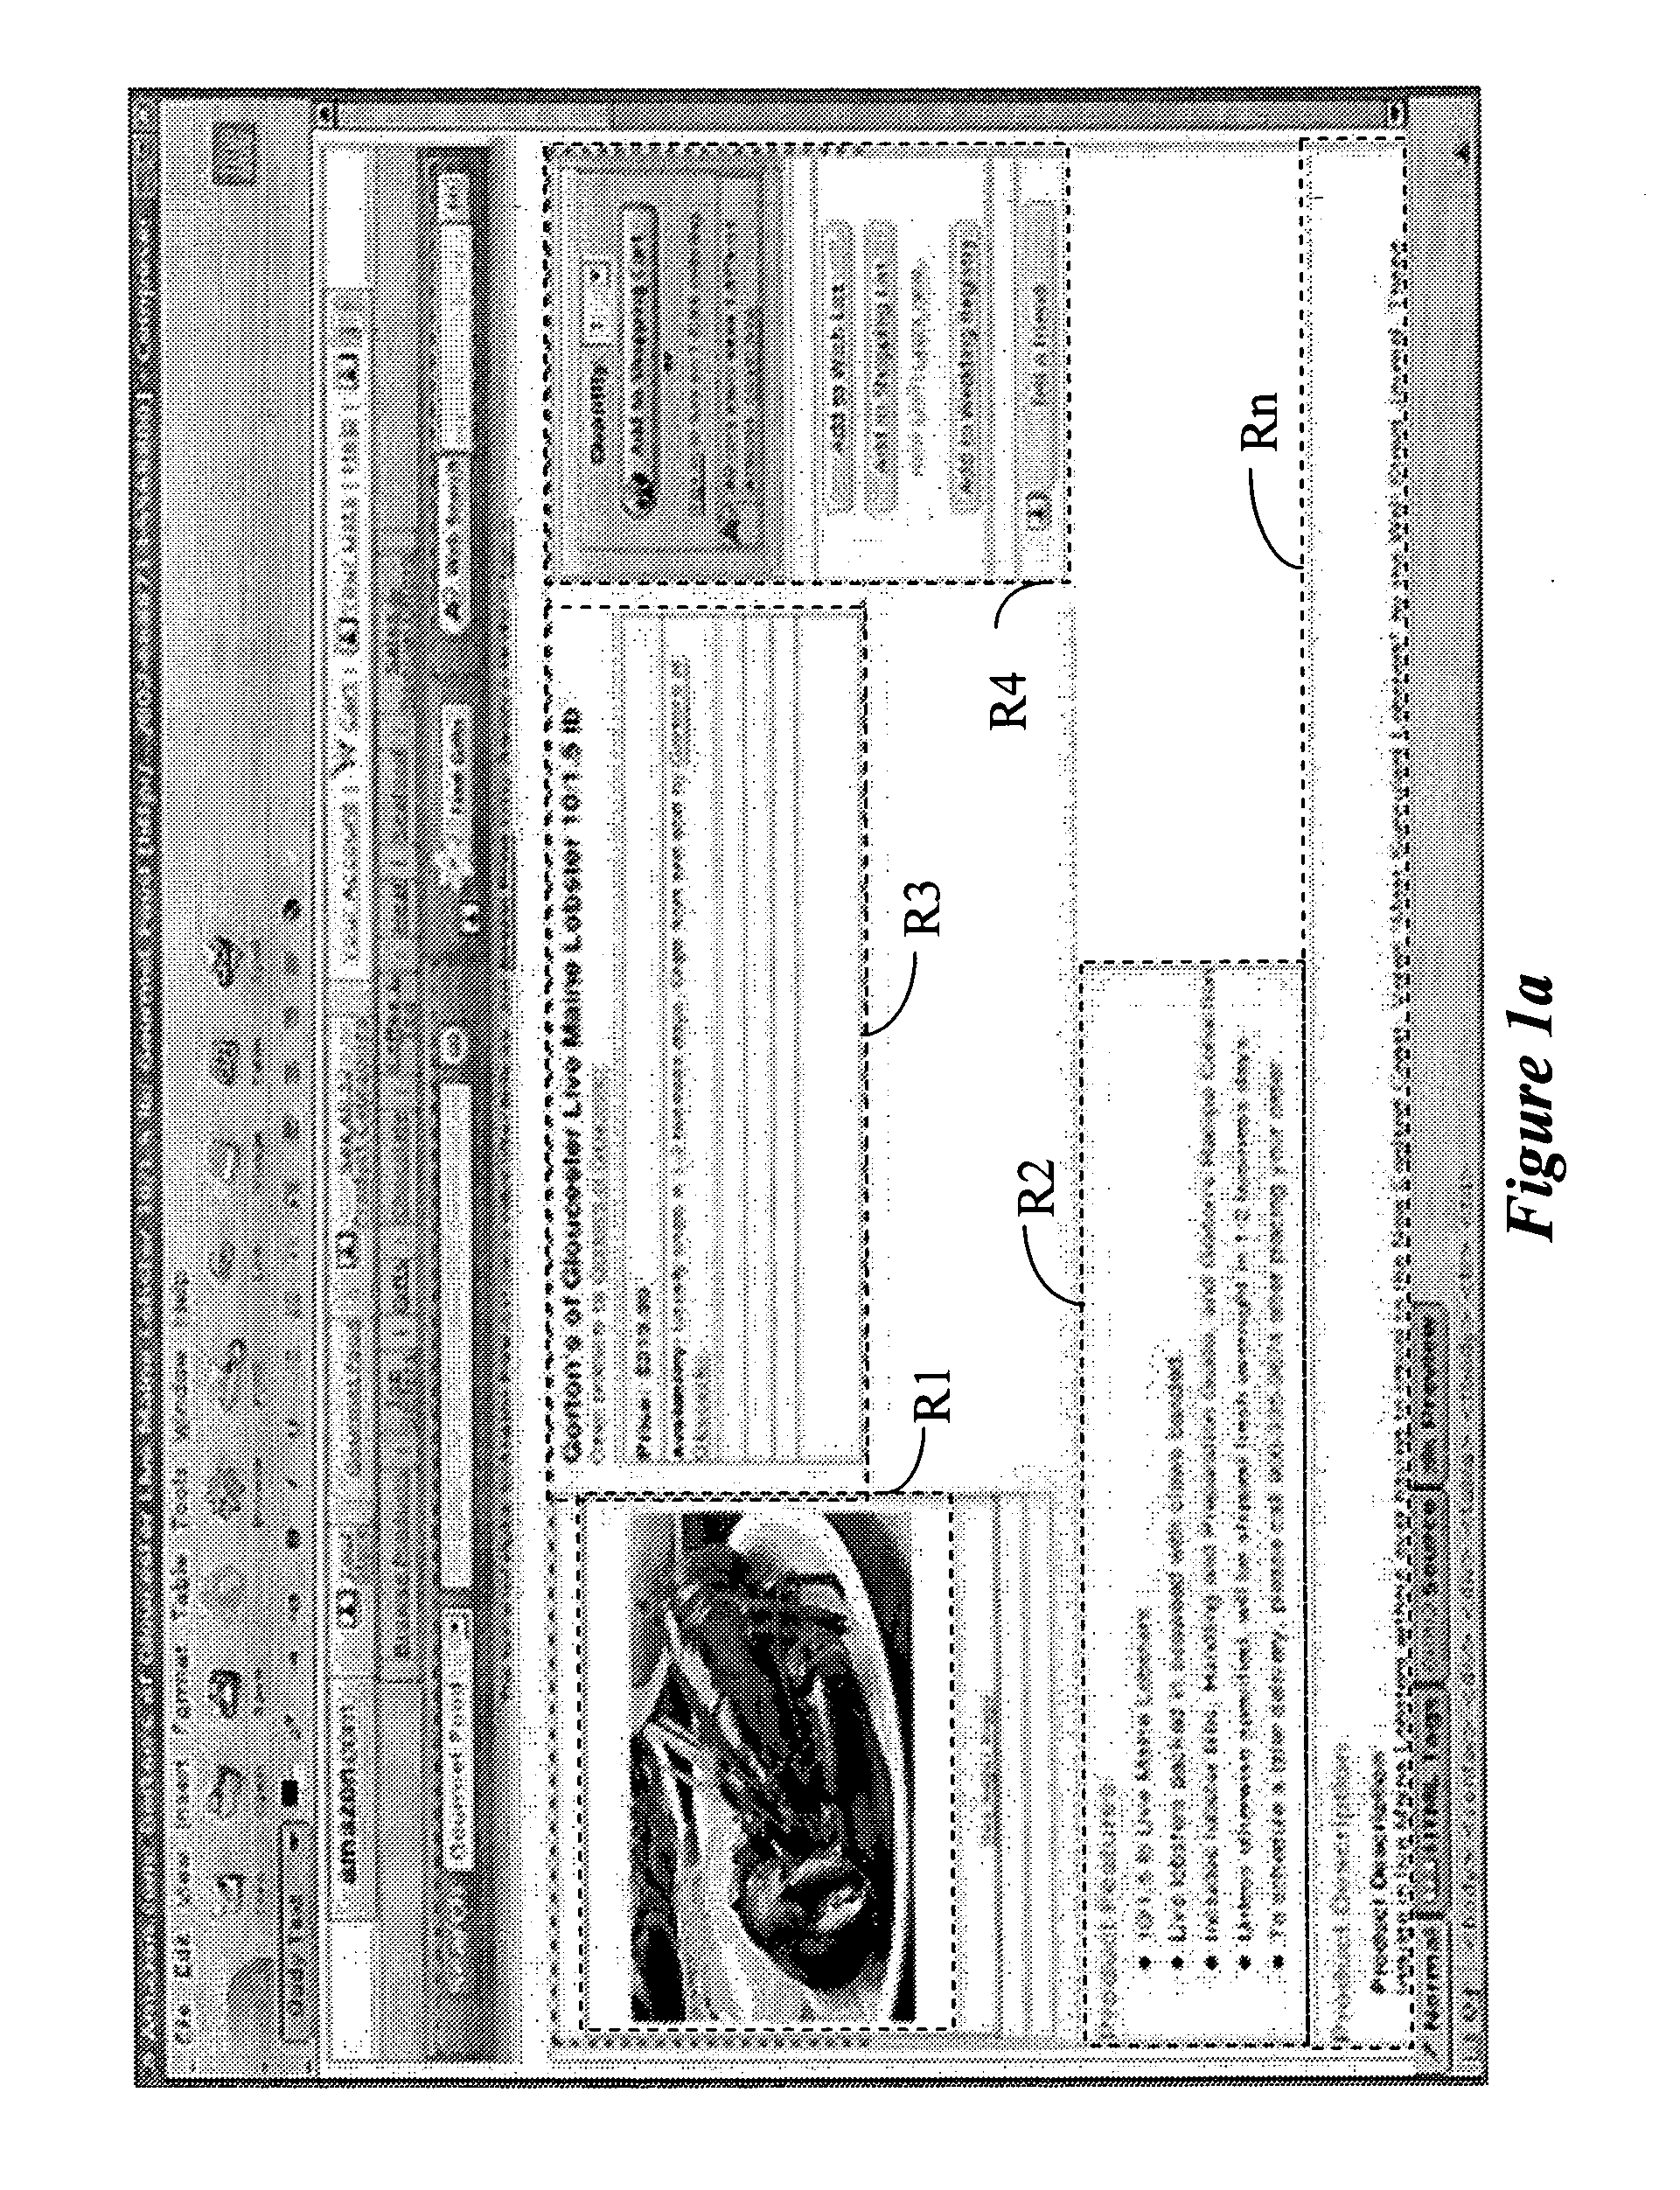 Method and system for extracting information from web pages